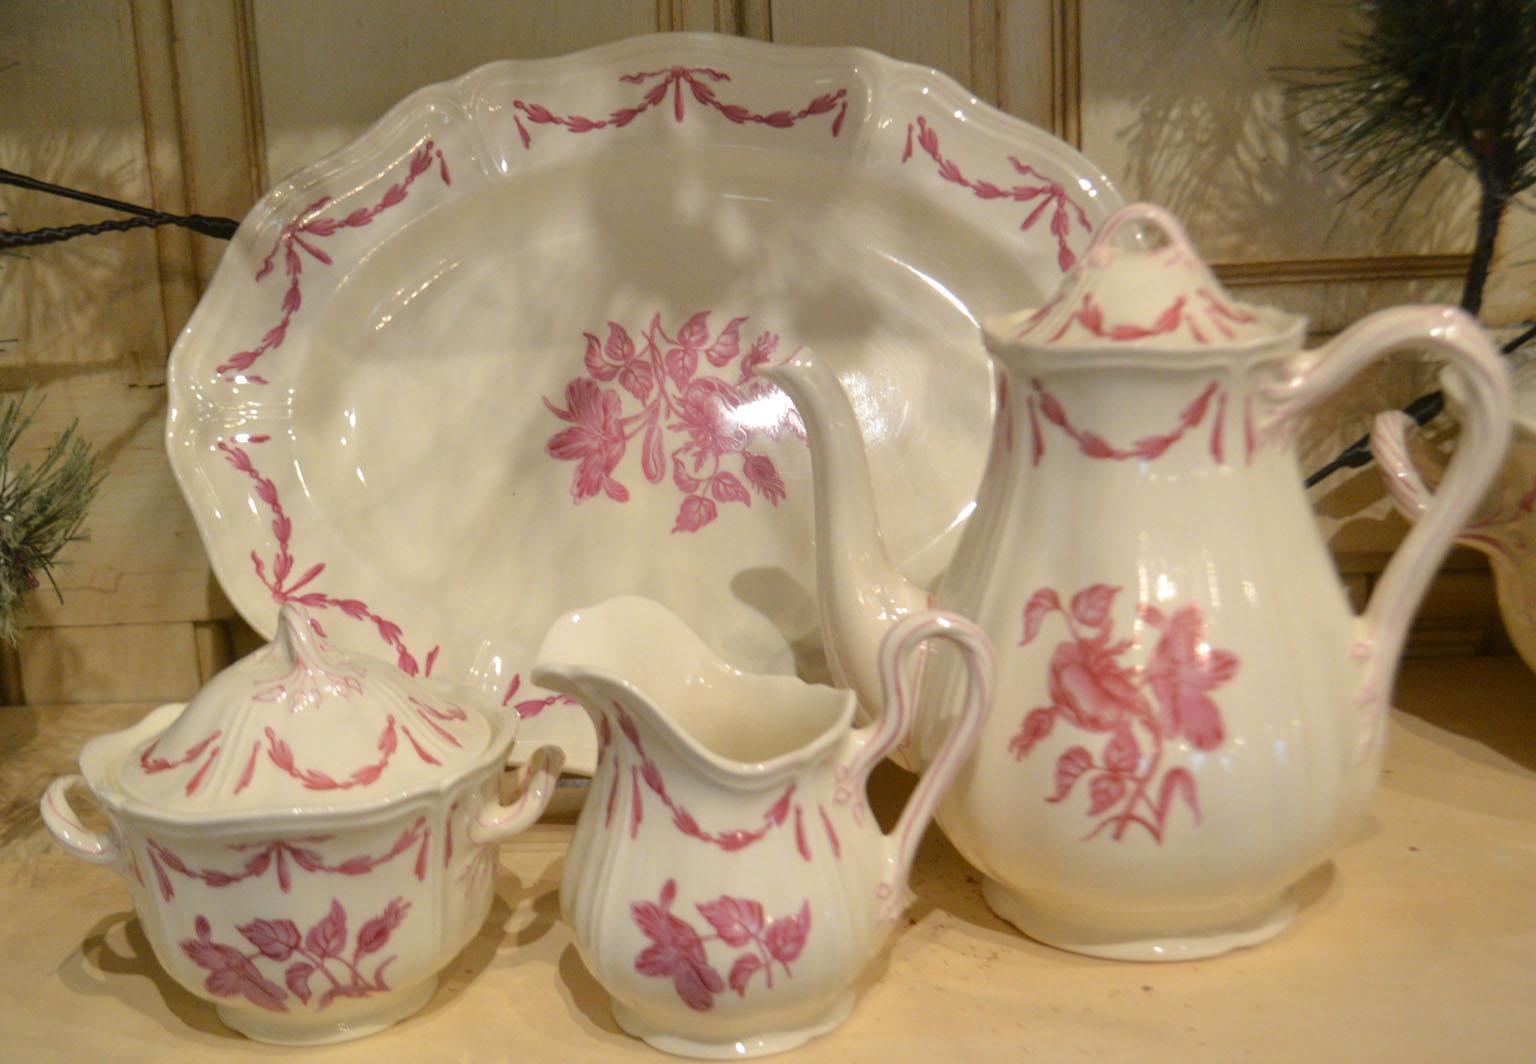 63-piece creme and pink fine bone china Wedgwood Williamsburg Husk Service for 8 + 1, service with floral motif throughout and brand stamp at undersides. Includes 9 dinner plates, 9 salad plates, 5 butter pat dishes, 1 sugar bowl, 1 condiment jar, 1